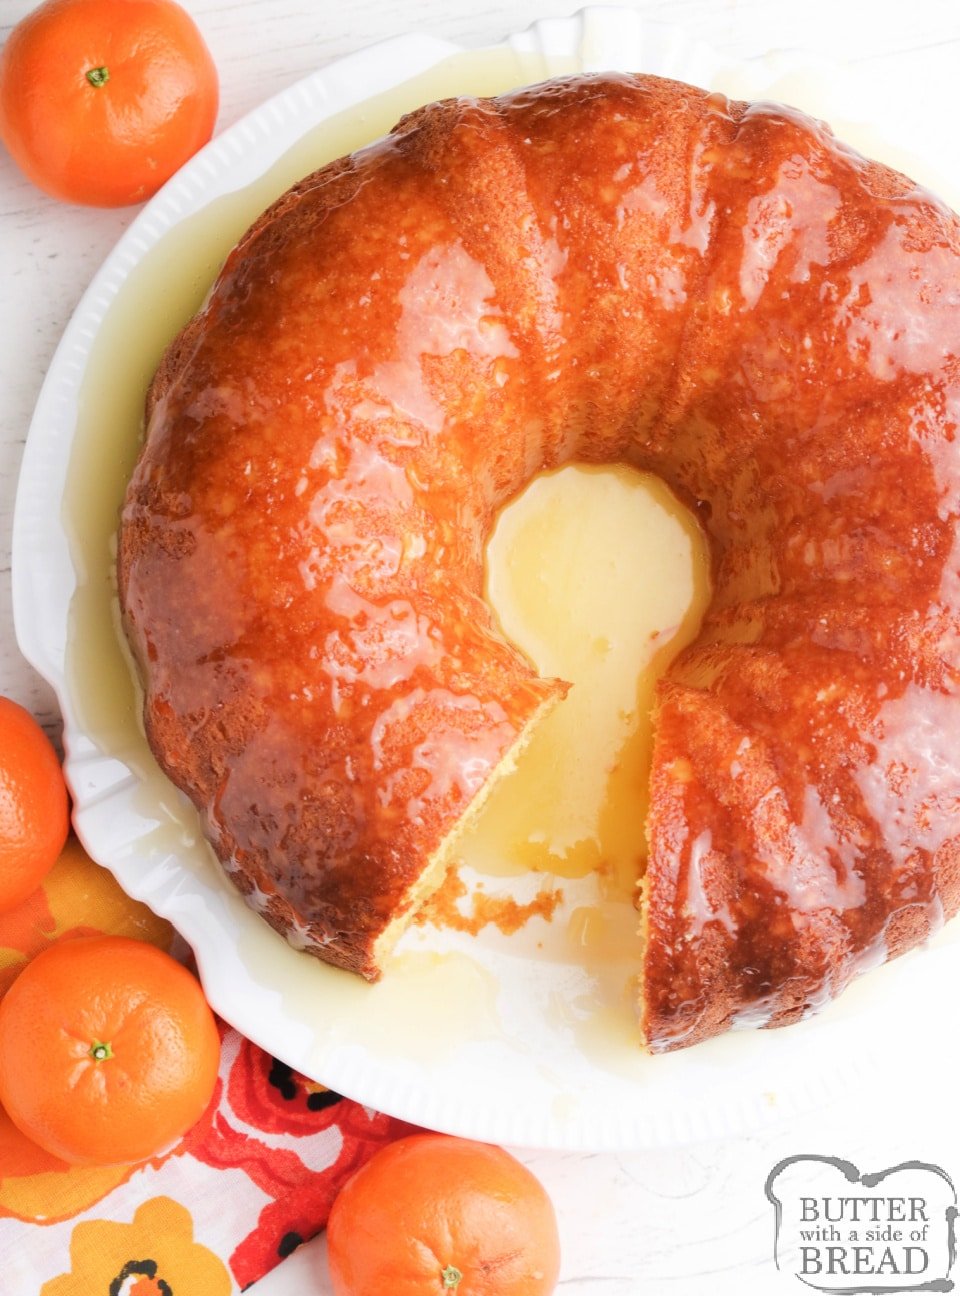 Orange Juice Bundt Cake made with a cake mix, orange juice and a few other basic ingredients. Topped with a buttery orange glaze, this delicious orange juice cake recipe is absolutely decadent!